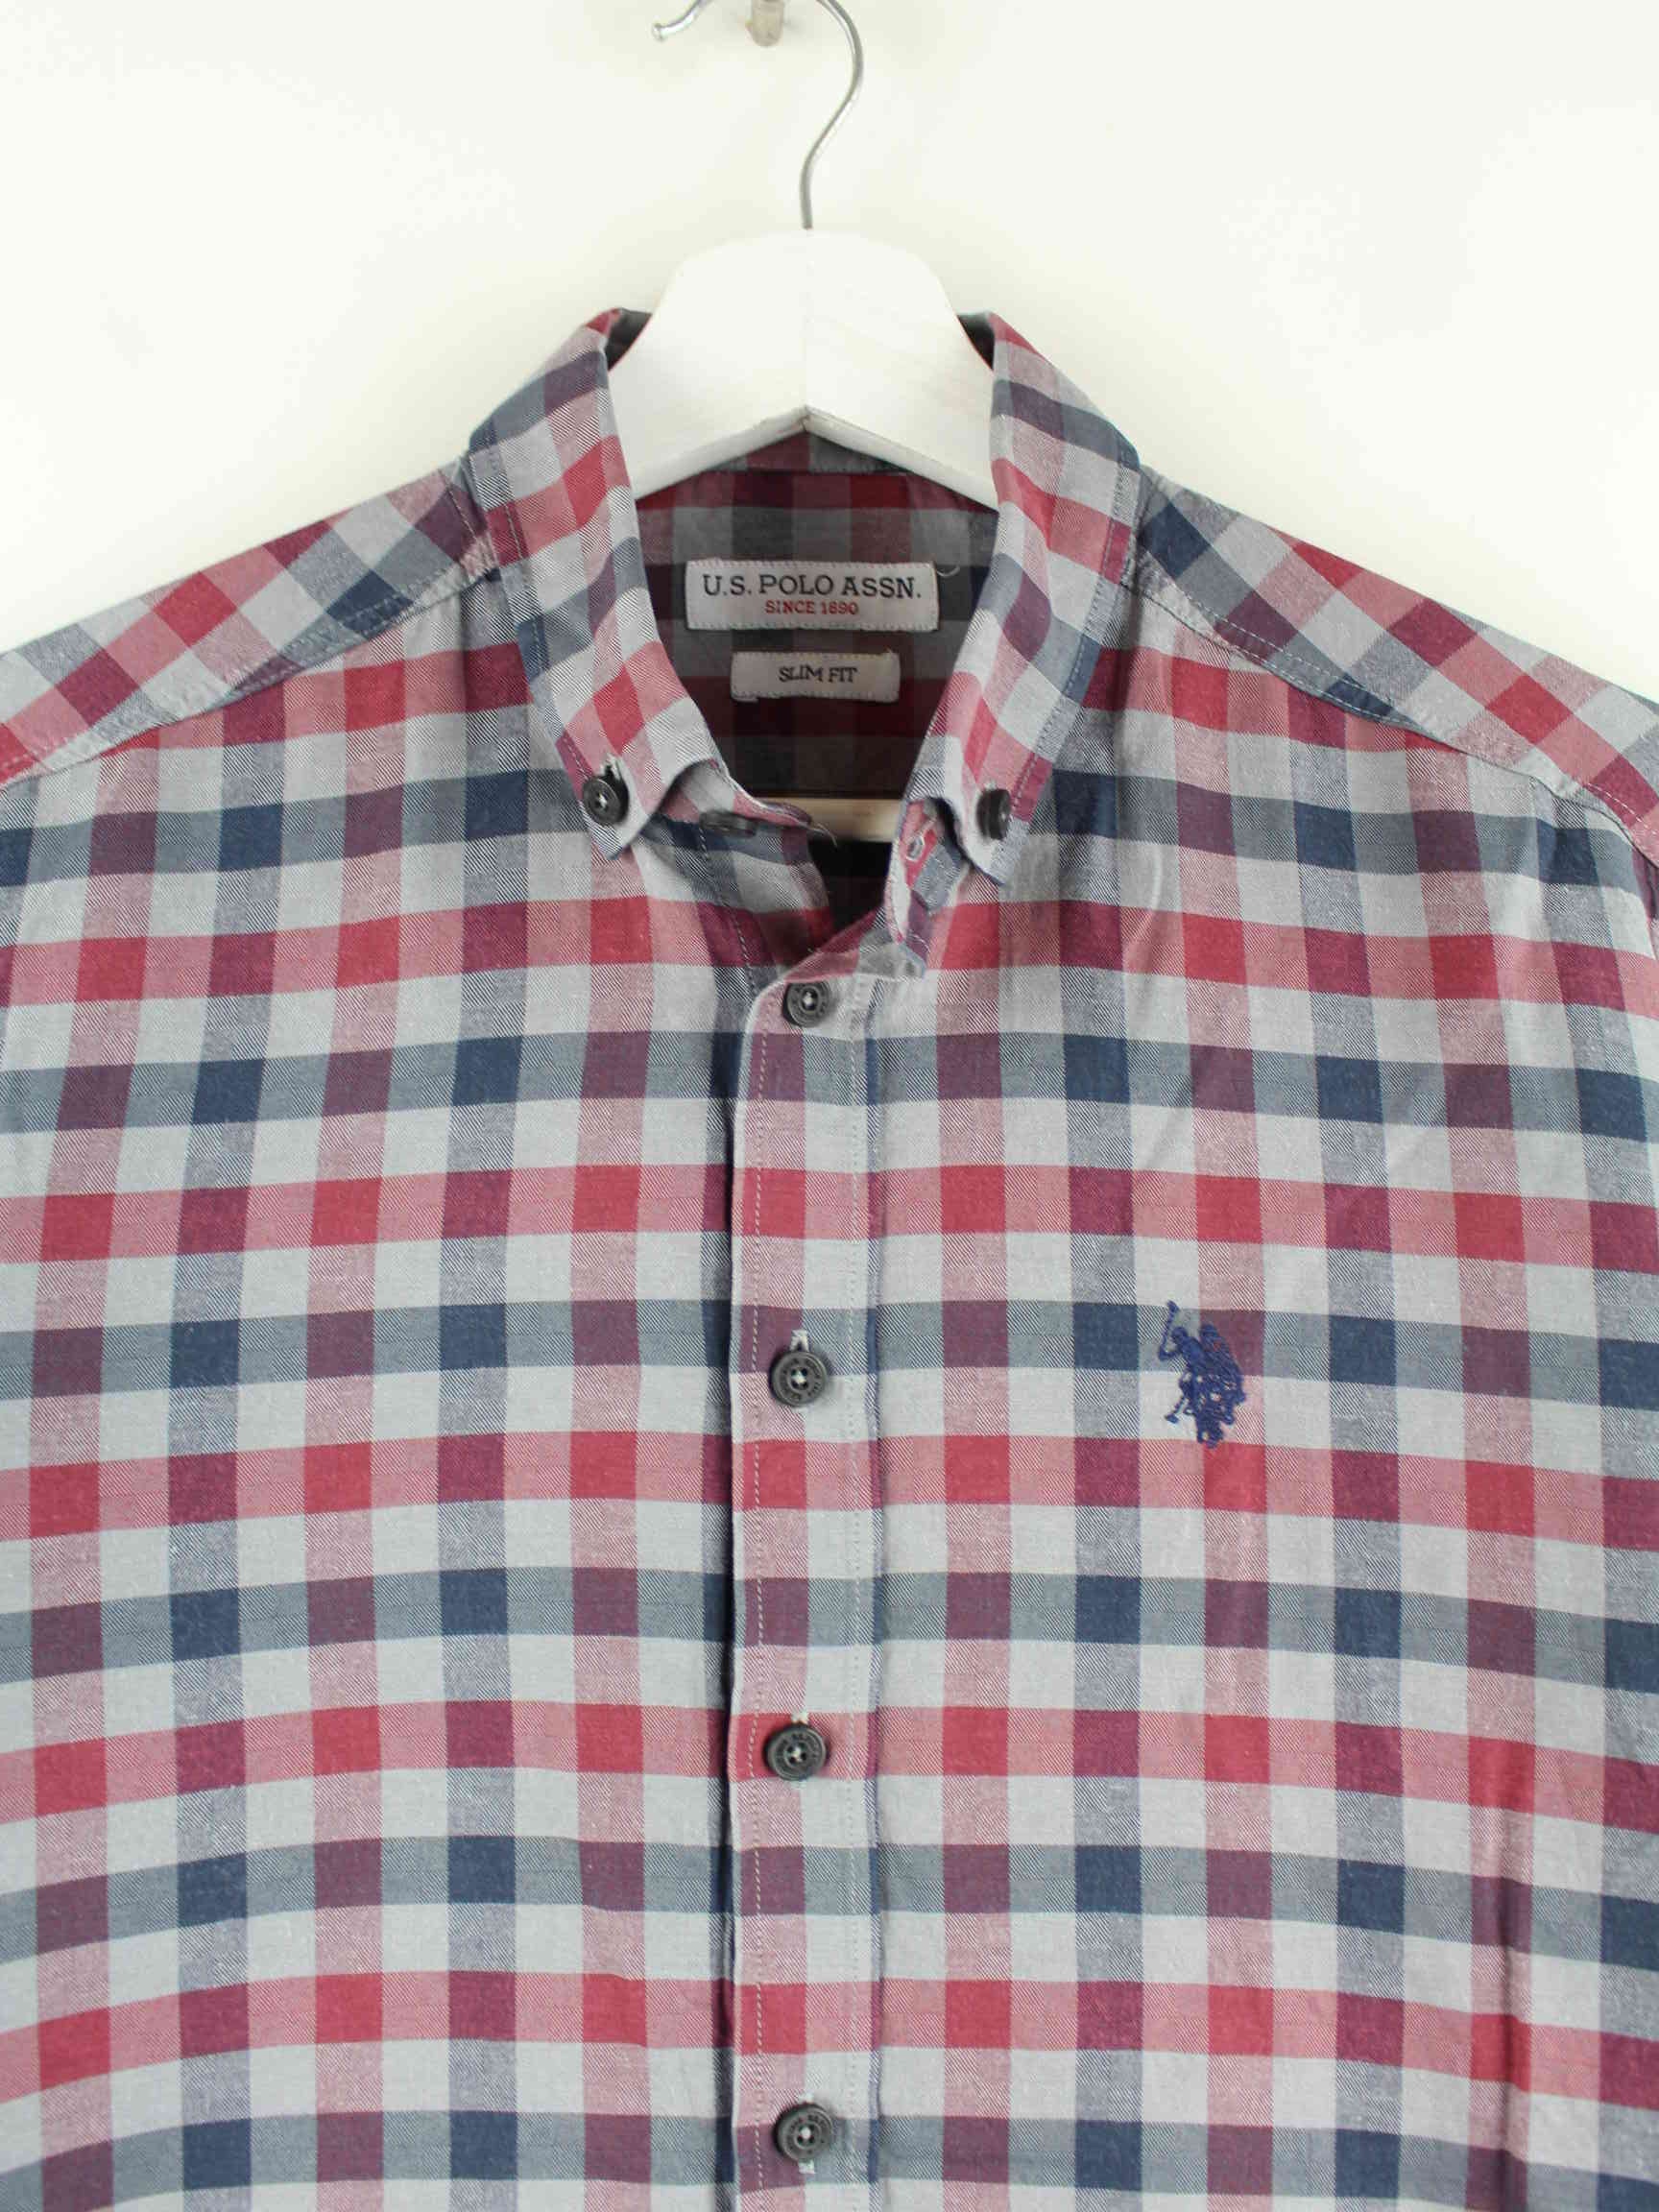 U.S. Polo ASSN. Slim Fit Checked Hemd Mehrfarbig S (detail image 1)